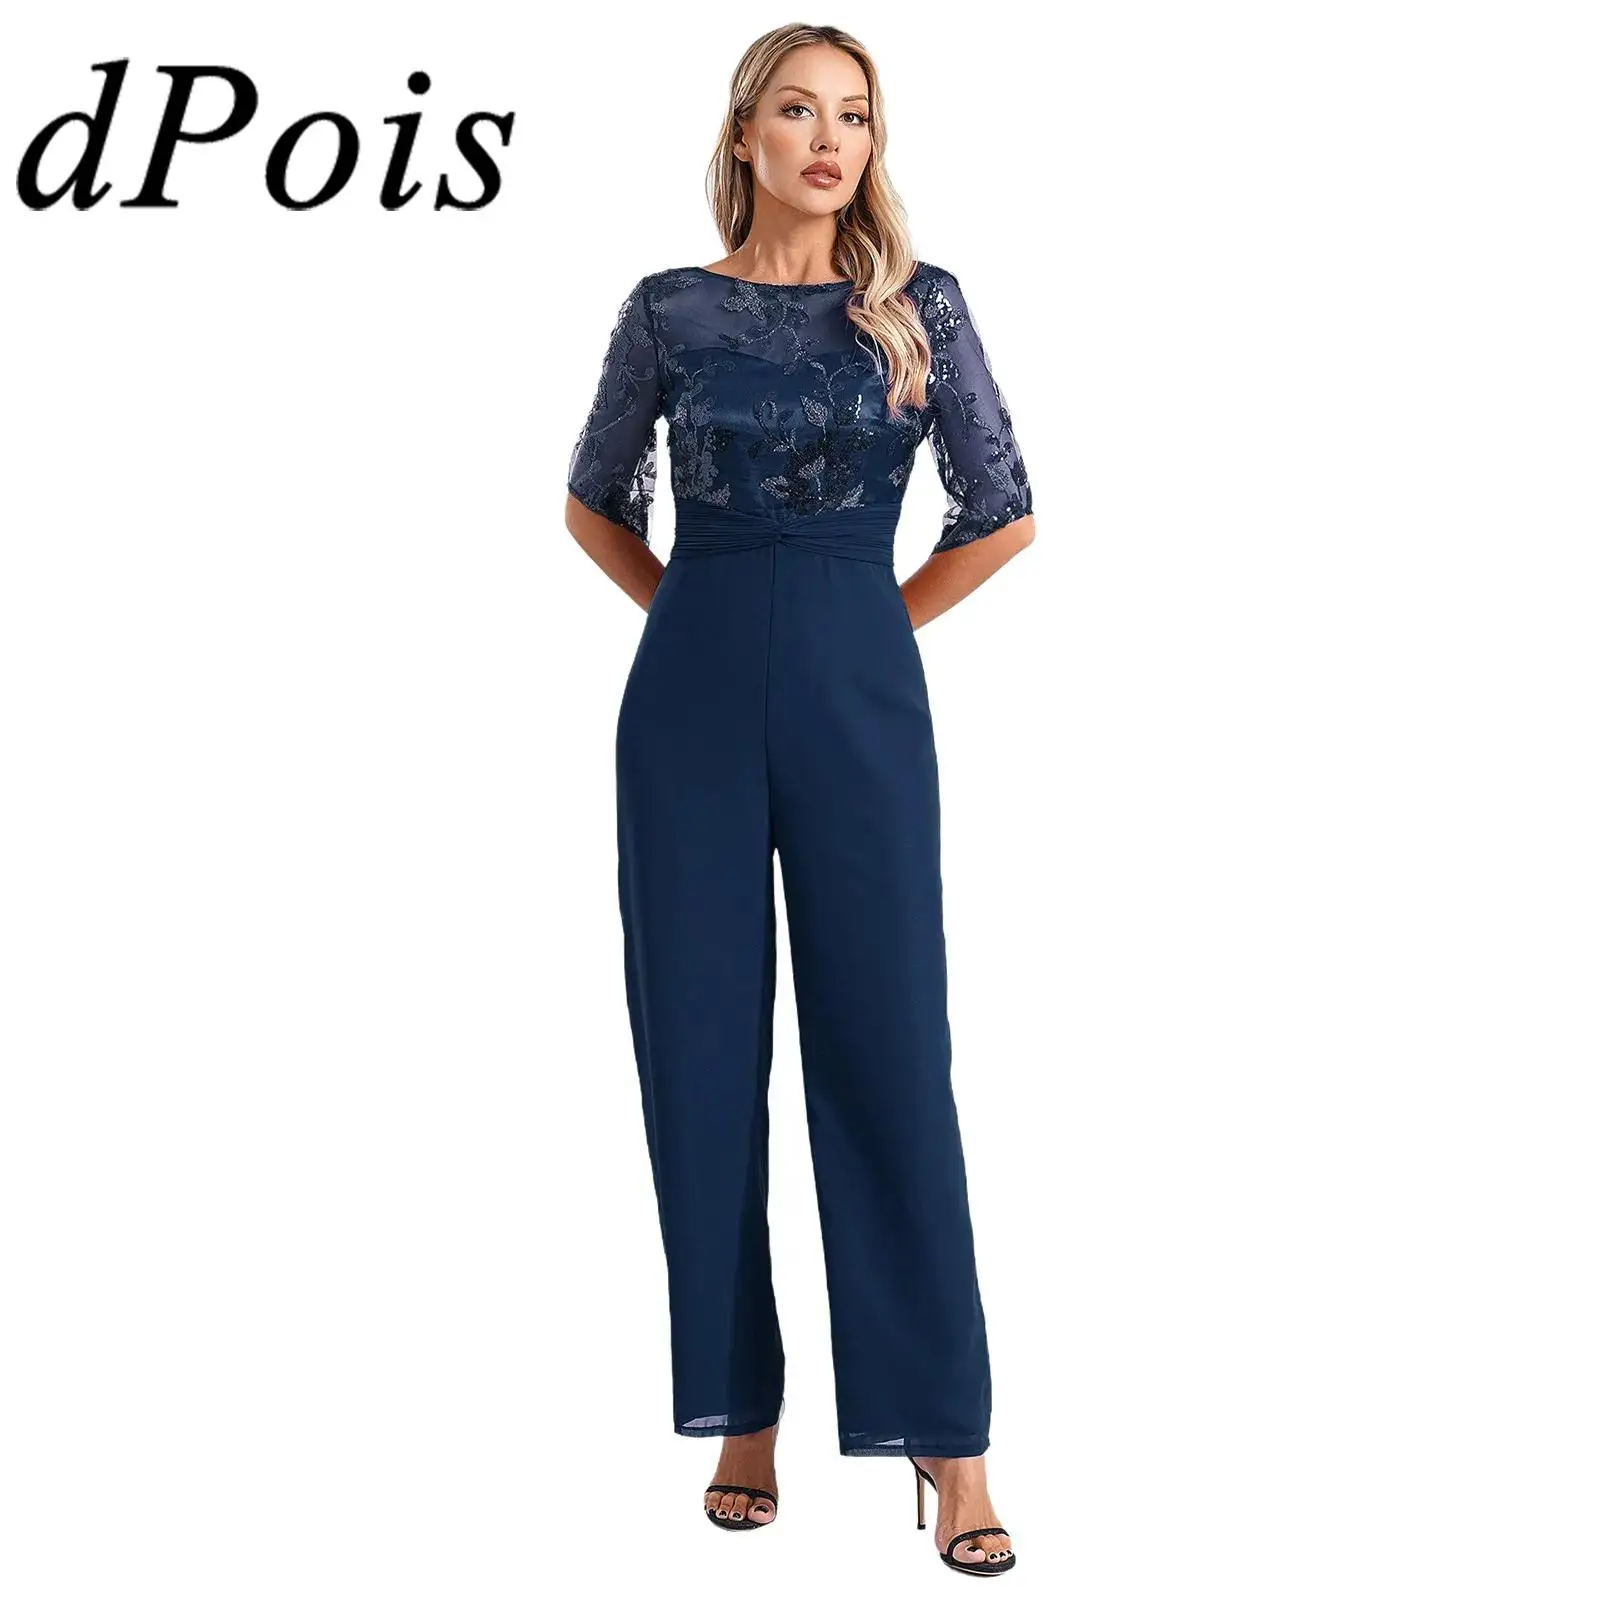 

Womens Sequined Mesh Jumpsuit Short Sleeve Wide Leg Pants Rompers Woman's Jumpsuits for Evening Party Cocktail Banquet Costume